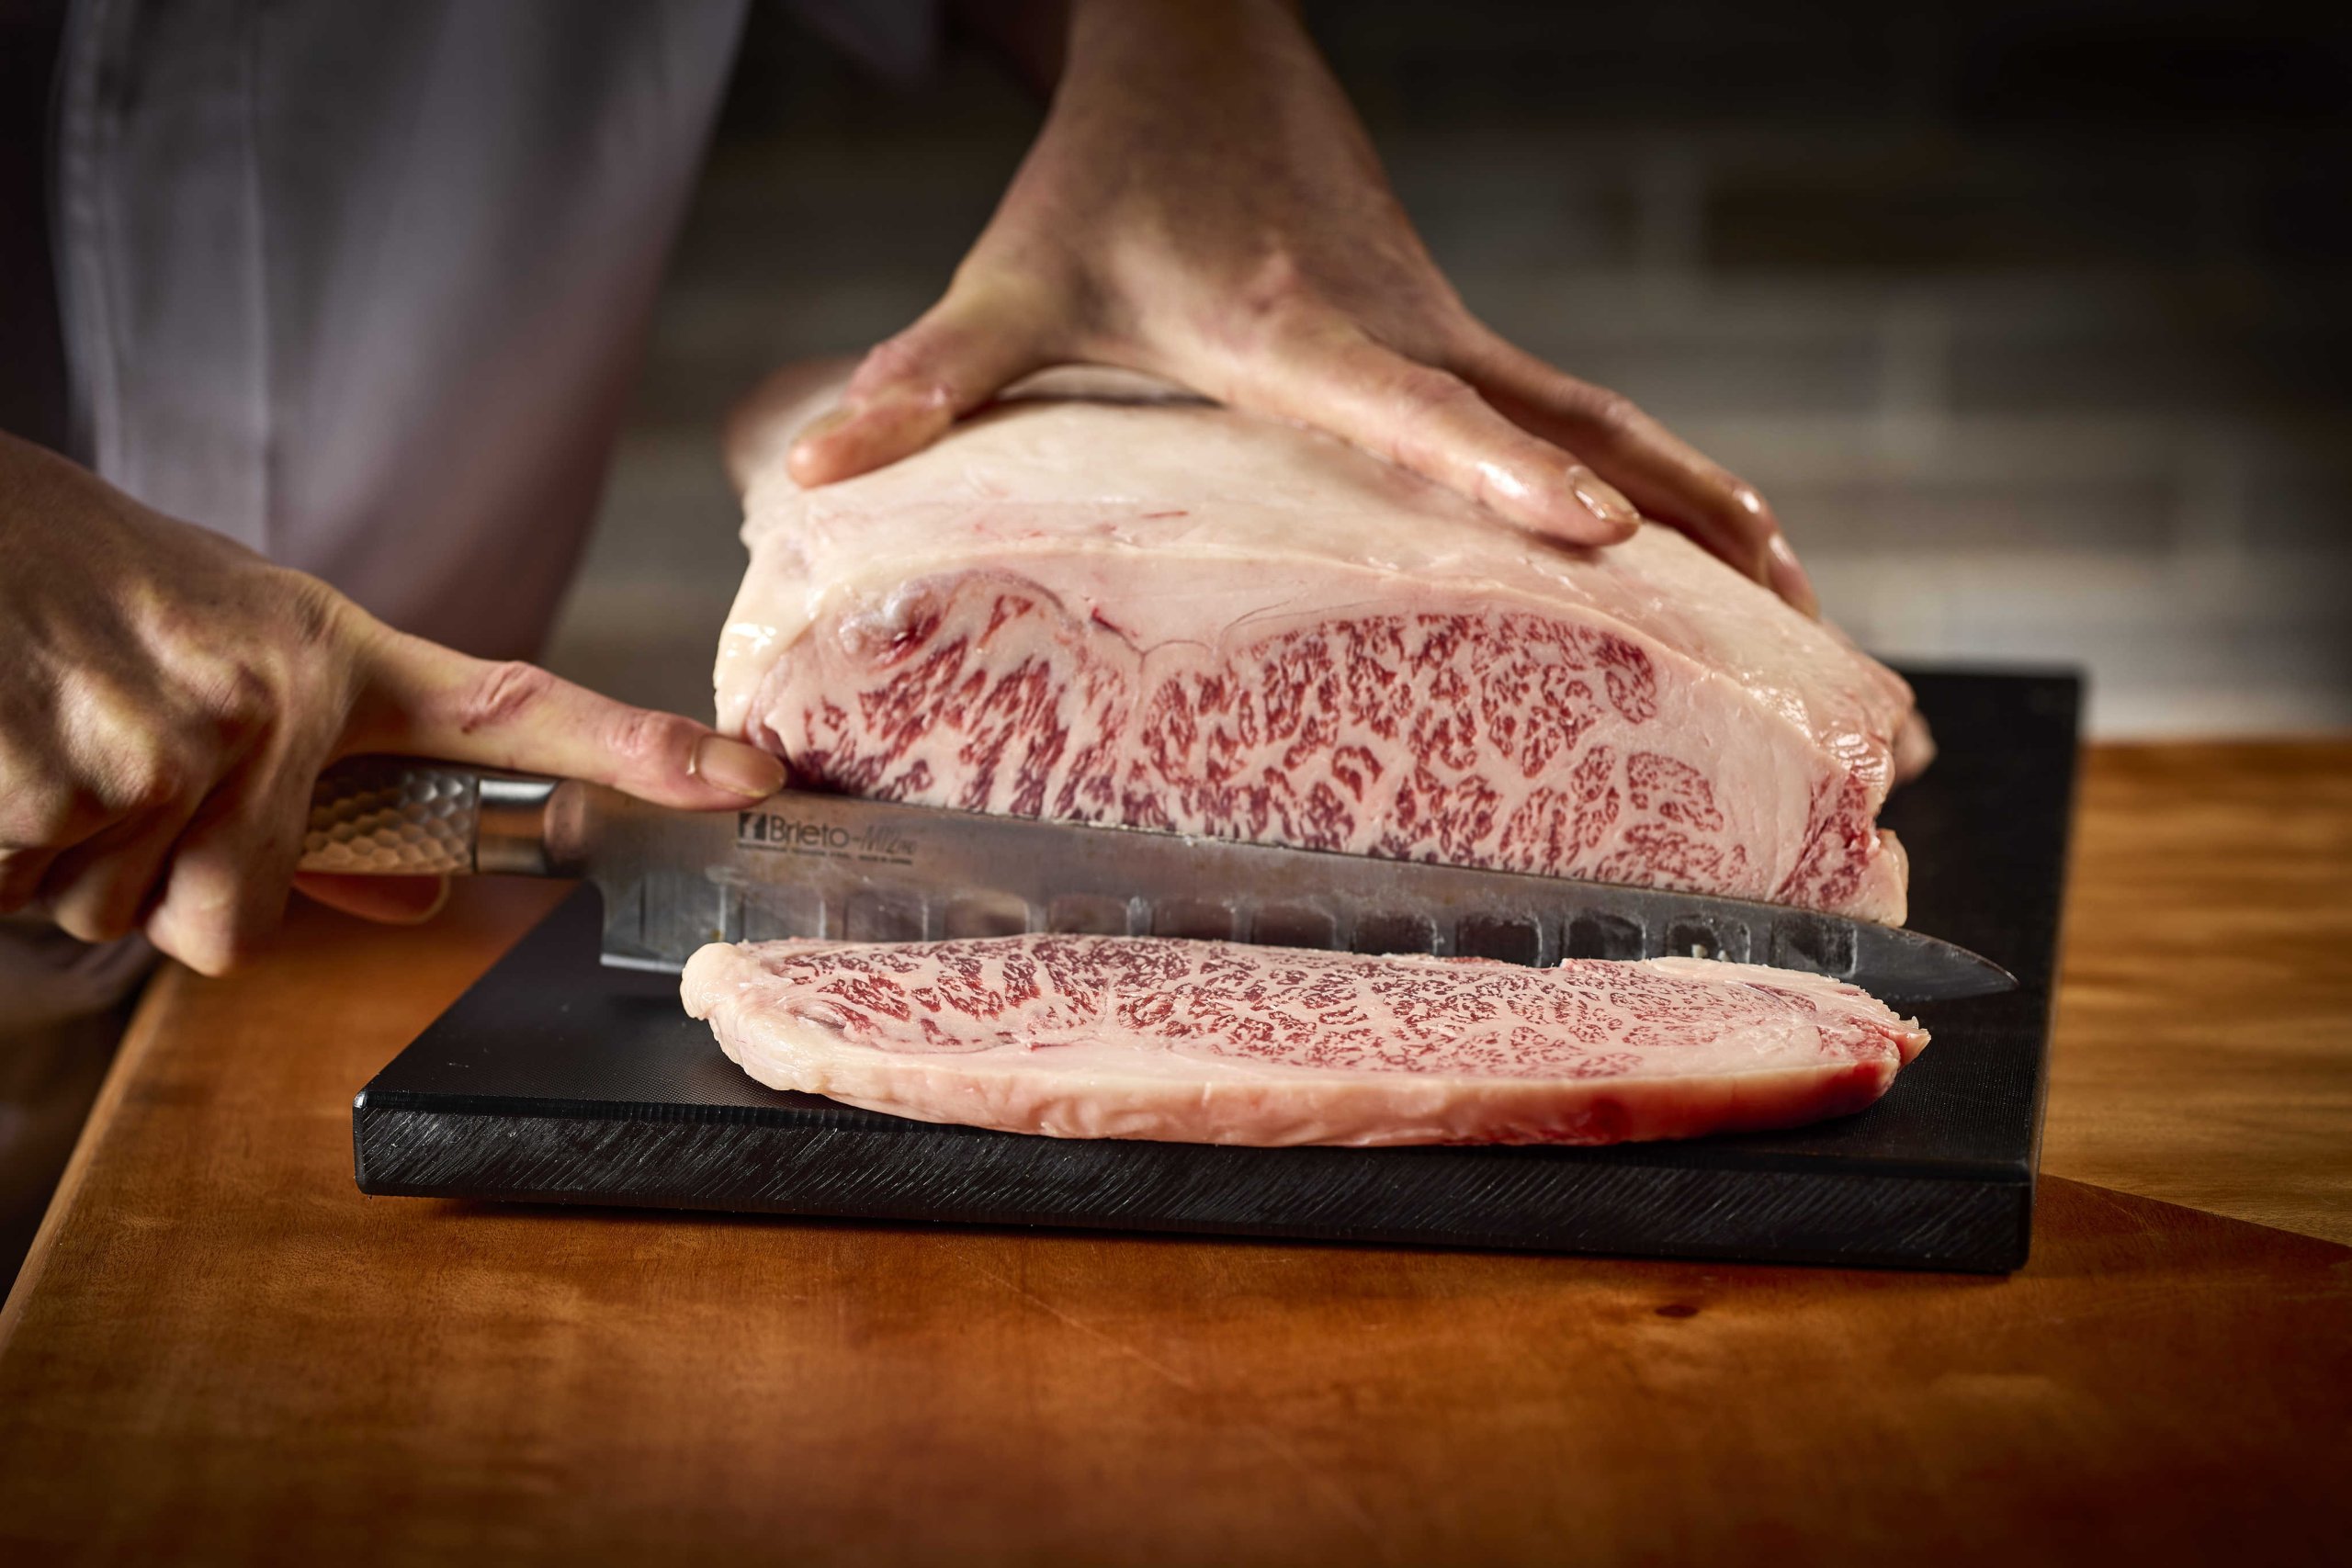 A person slicing Wagyu Beef on a cutting board